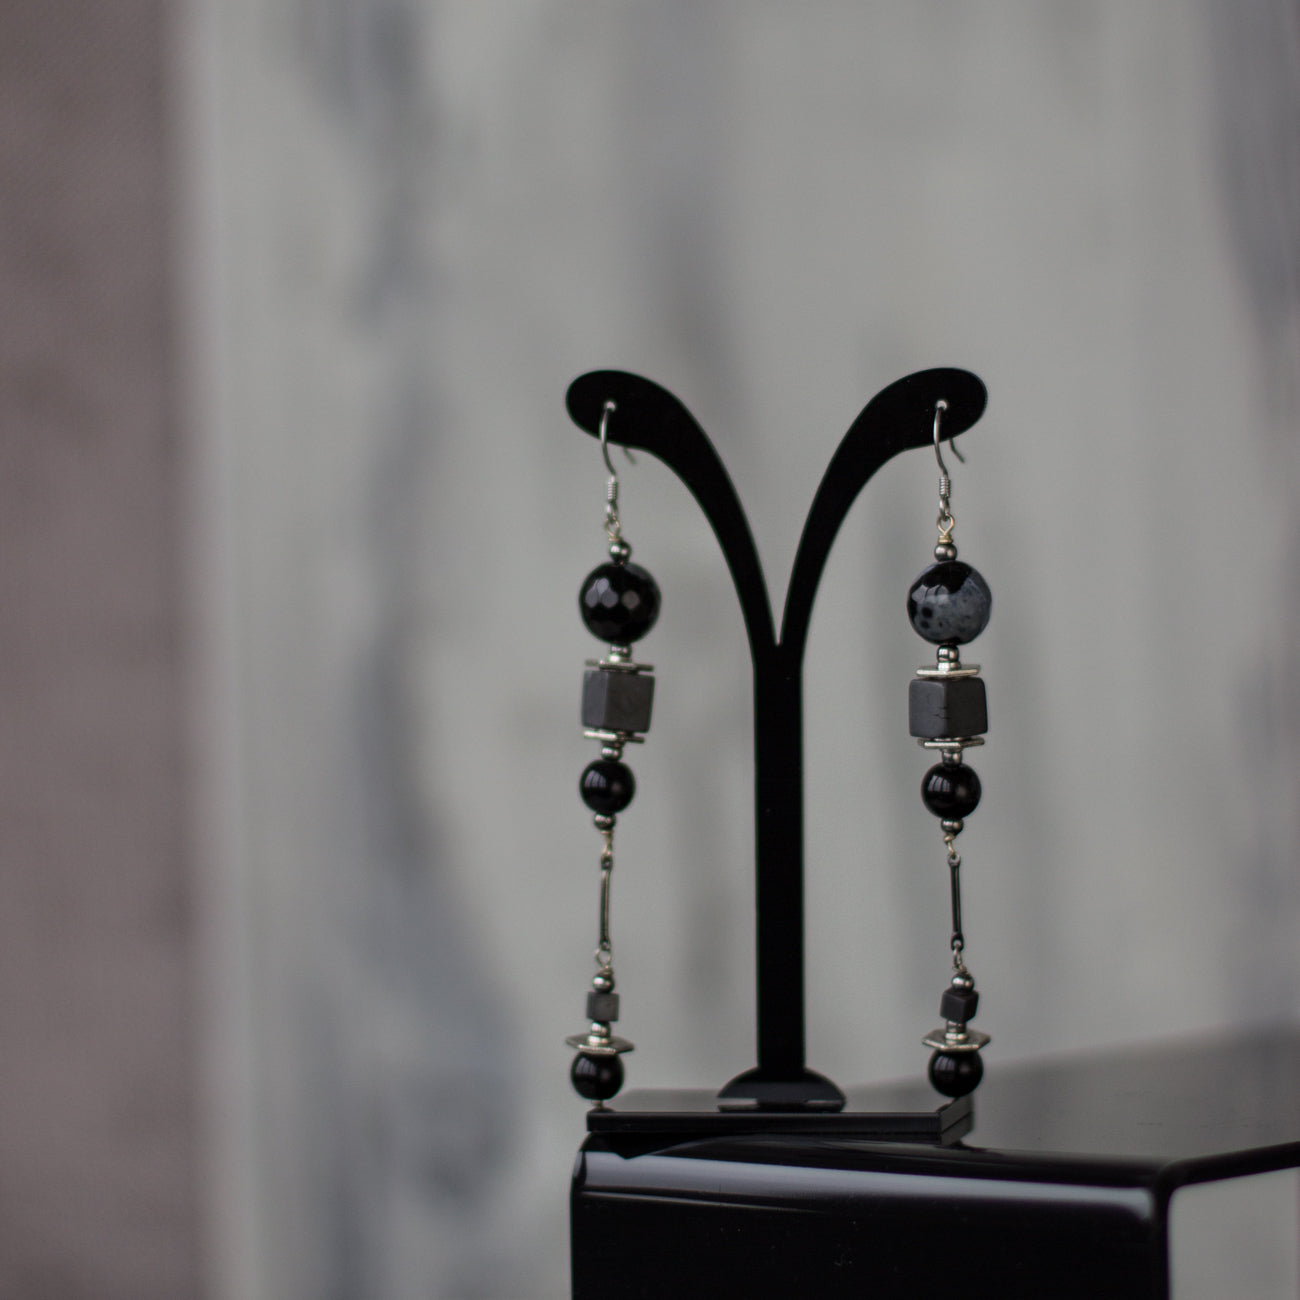 Shop women's jewelry at LeFlowers Boutique to discover unique handmade pieces for your wardrobe. Black long earrings. Dangle drop earrings. Handmade jewelry. Natural stone jewelry